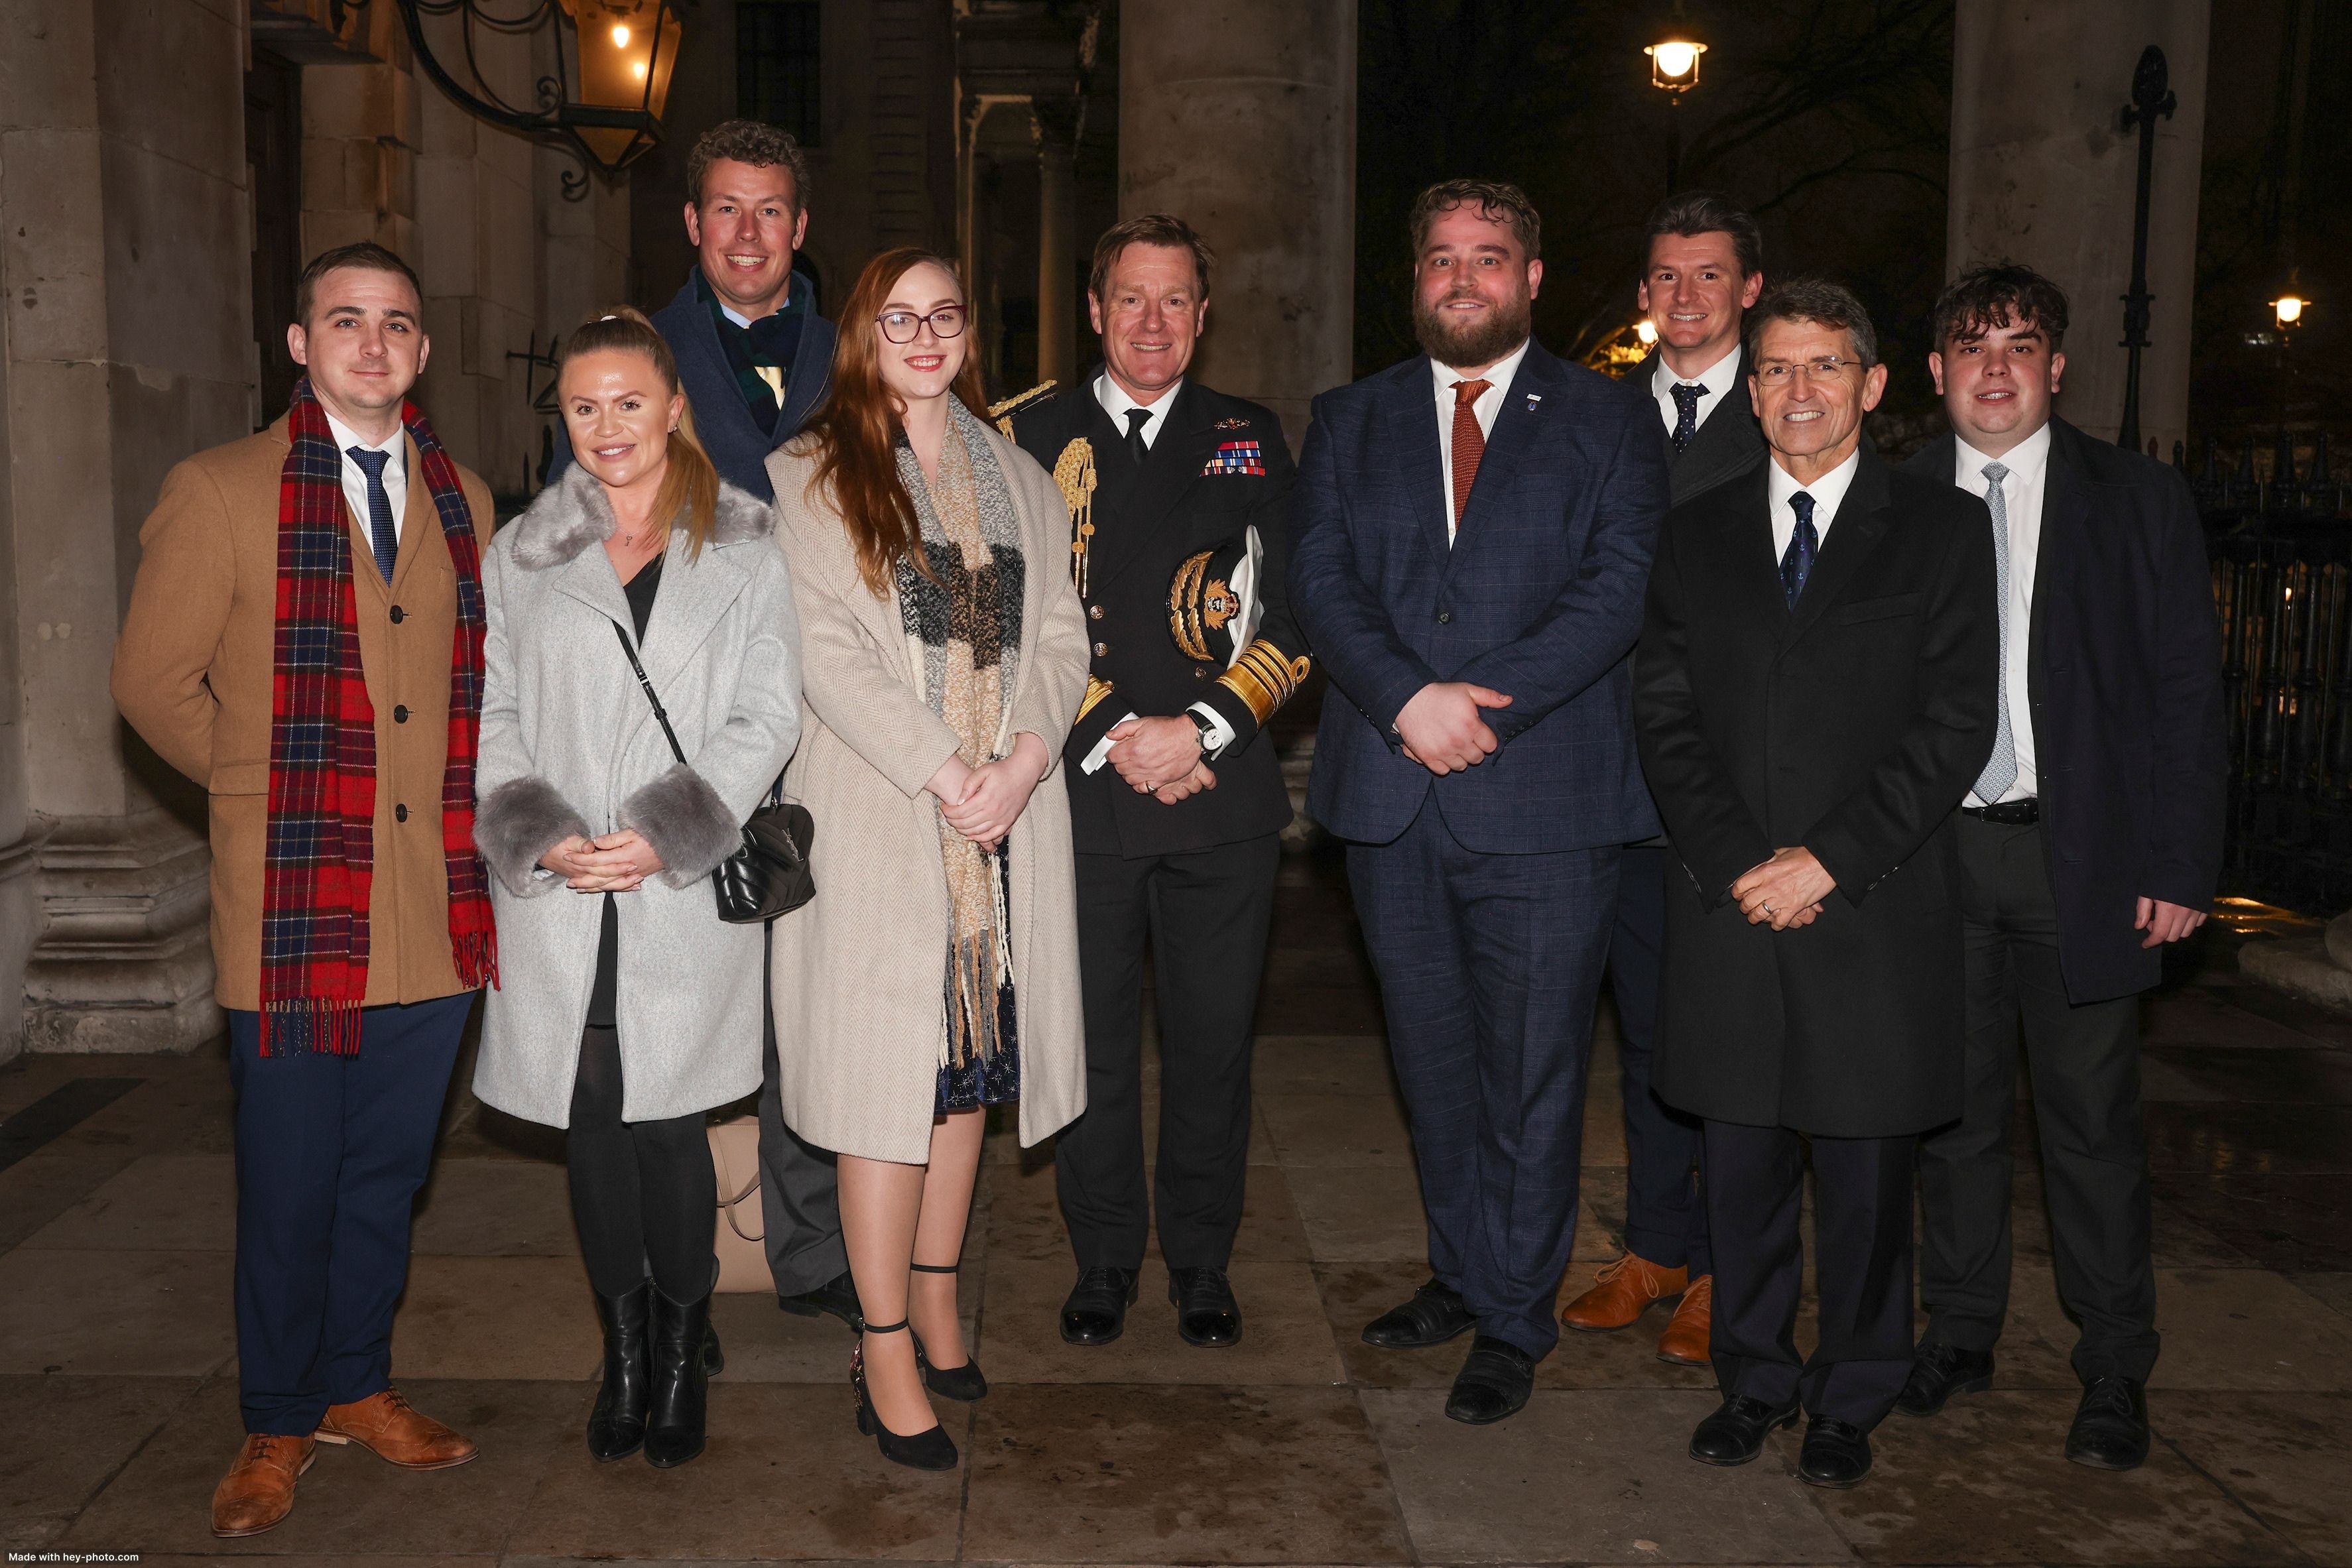 The Royal Navy and Royal Marines Charity Hosts Evening Reception – Sponsored by Navy Leaders and L3Harris – Thanking Supporters of the Charity Following Royal Navy Admiralty Service